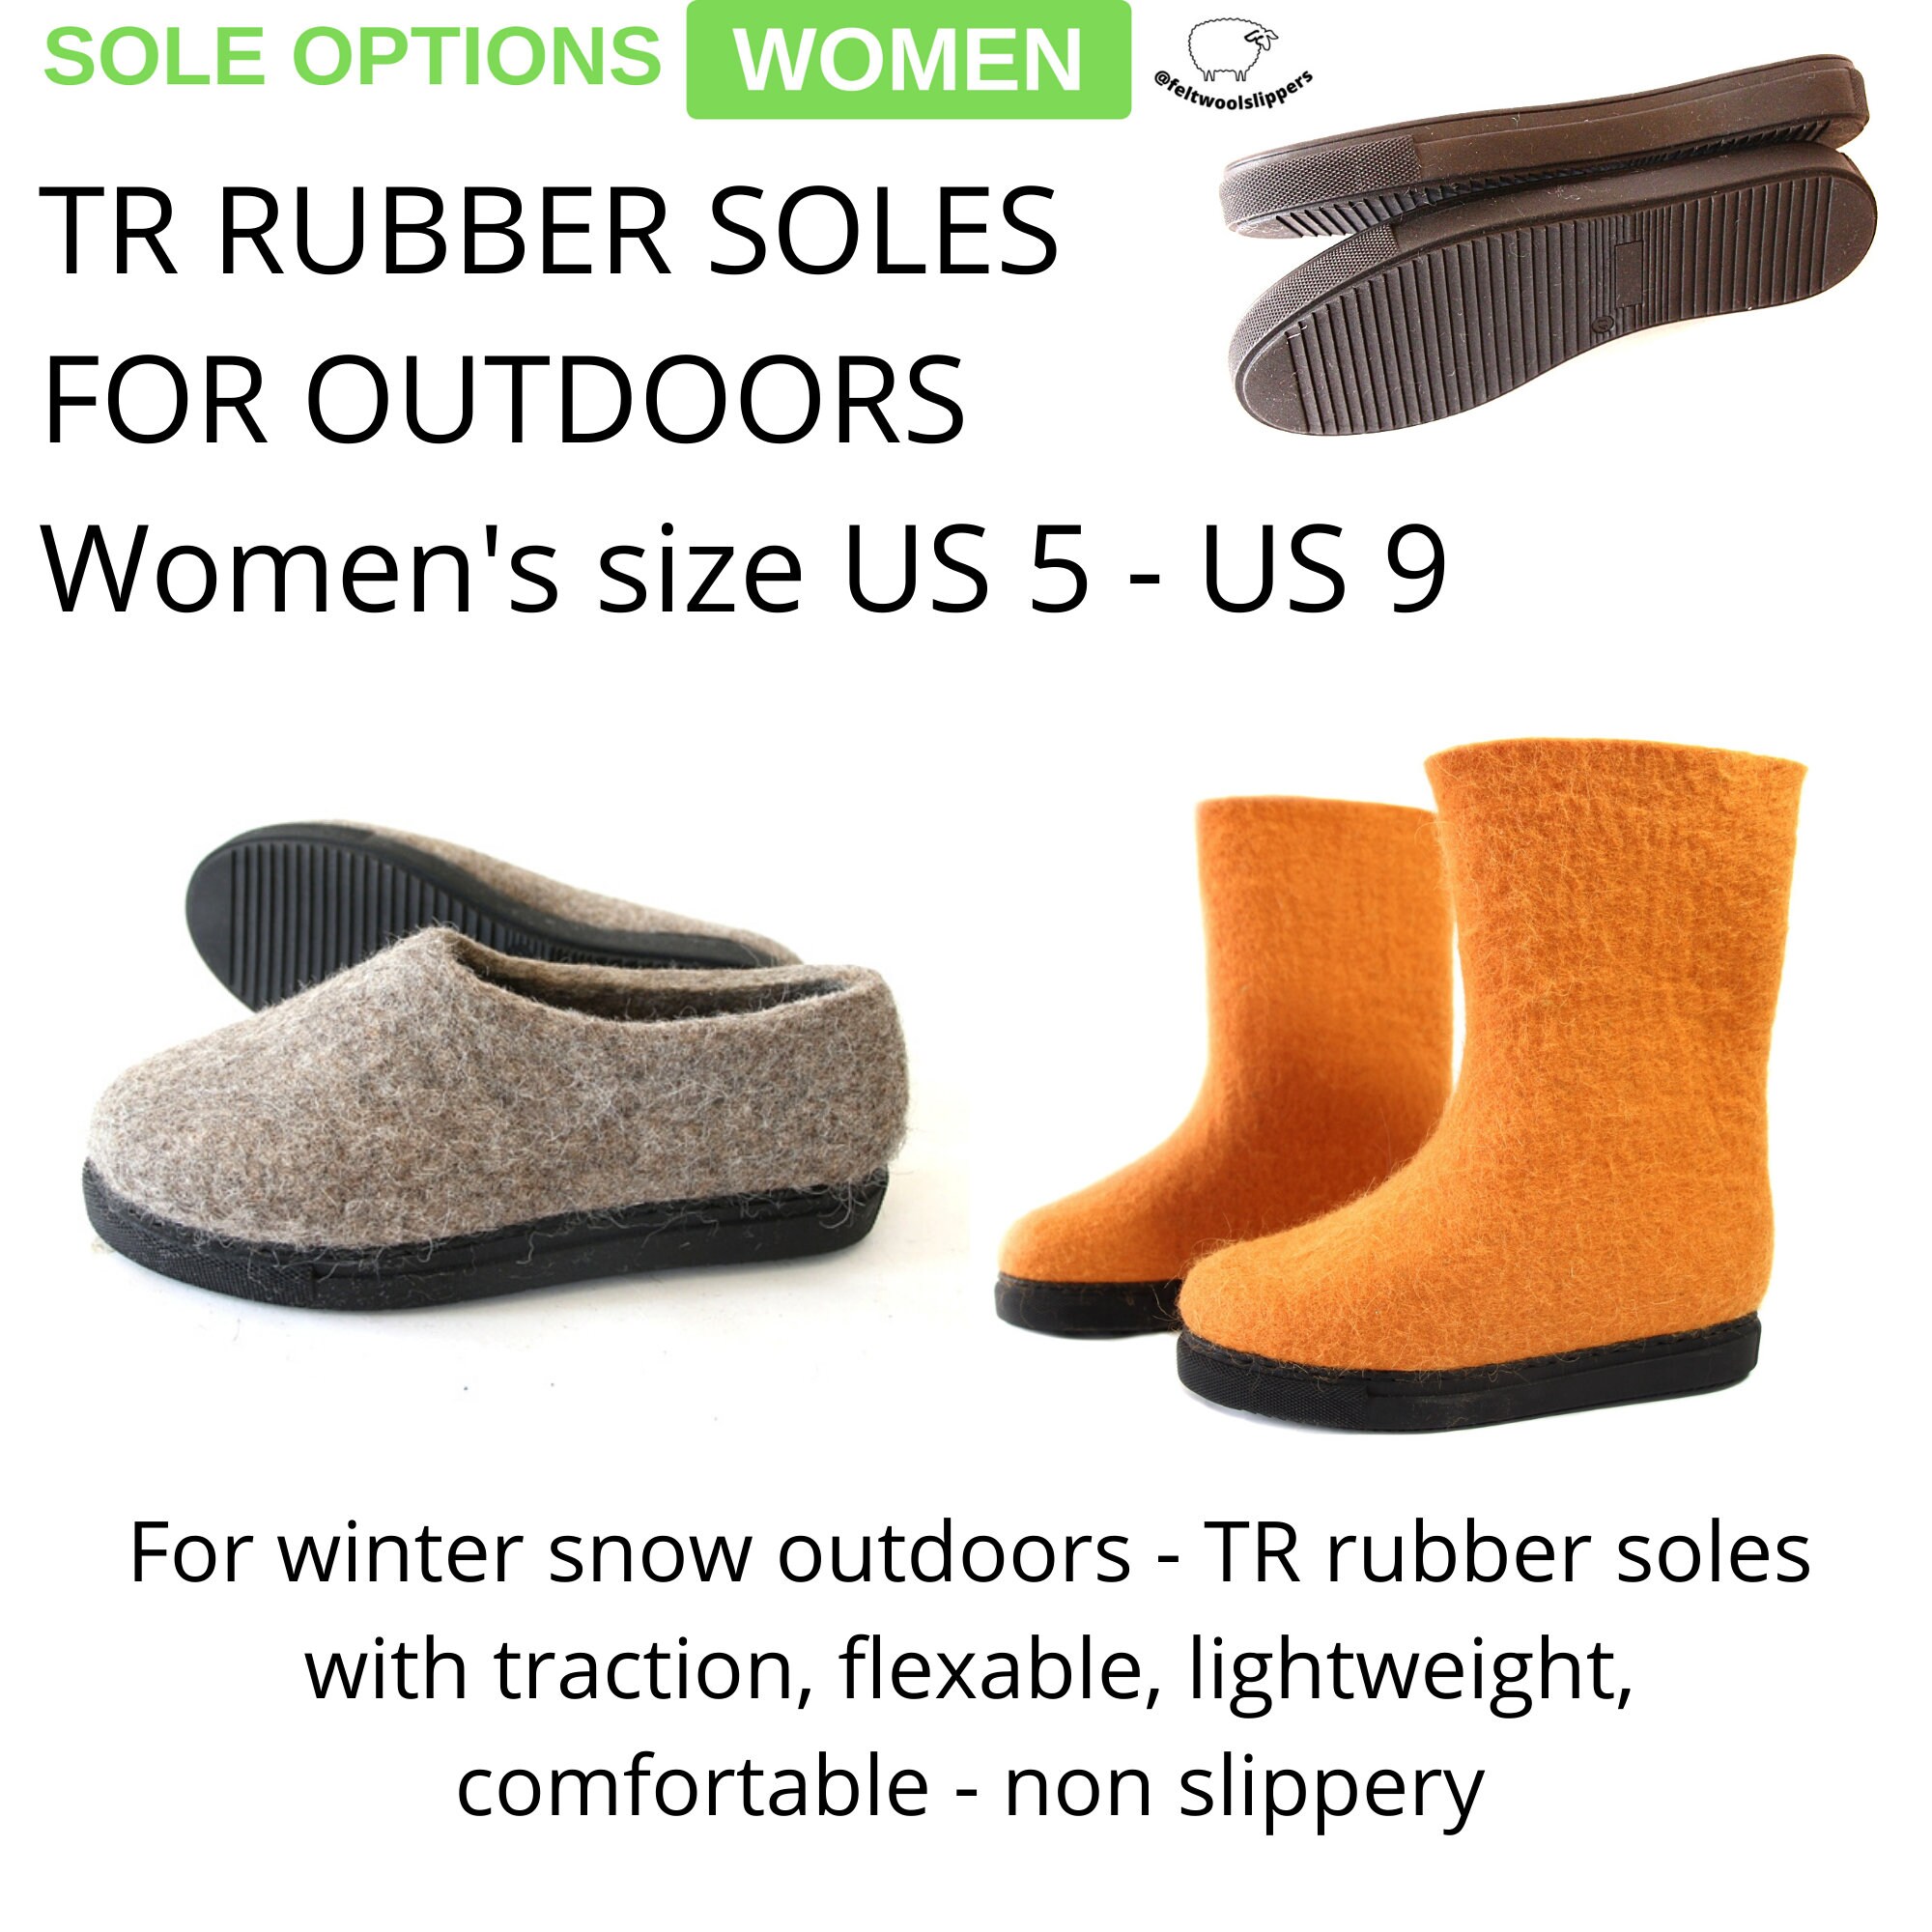 CUSTOM Organic WOOL 30 colors Felt winter boots women Orange for Indoors or Outside Shoes Womens Shoes Boots Rain & Snow Boots 